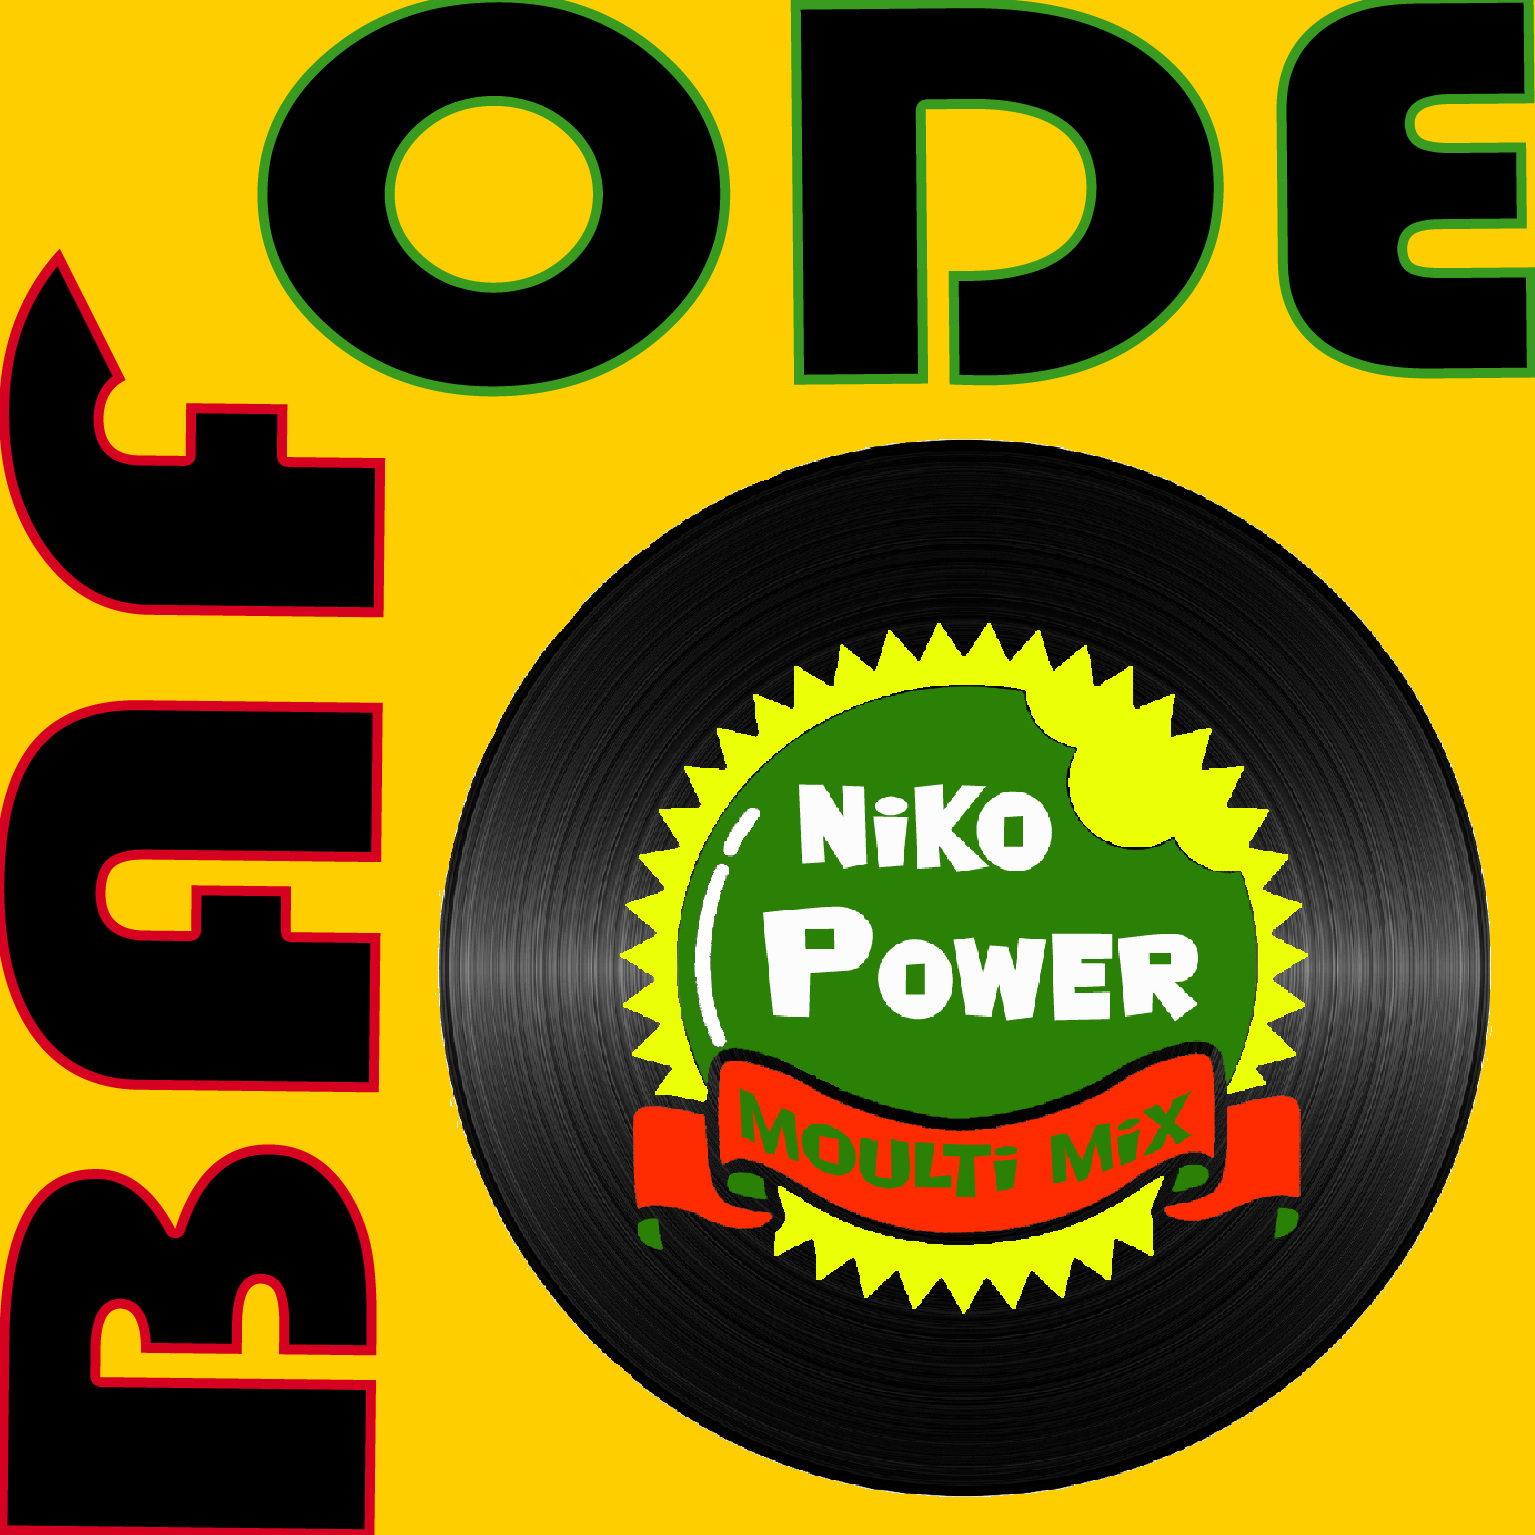 Niko Power & Bafode to perform guest show 27th May 2020